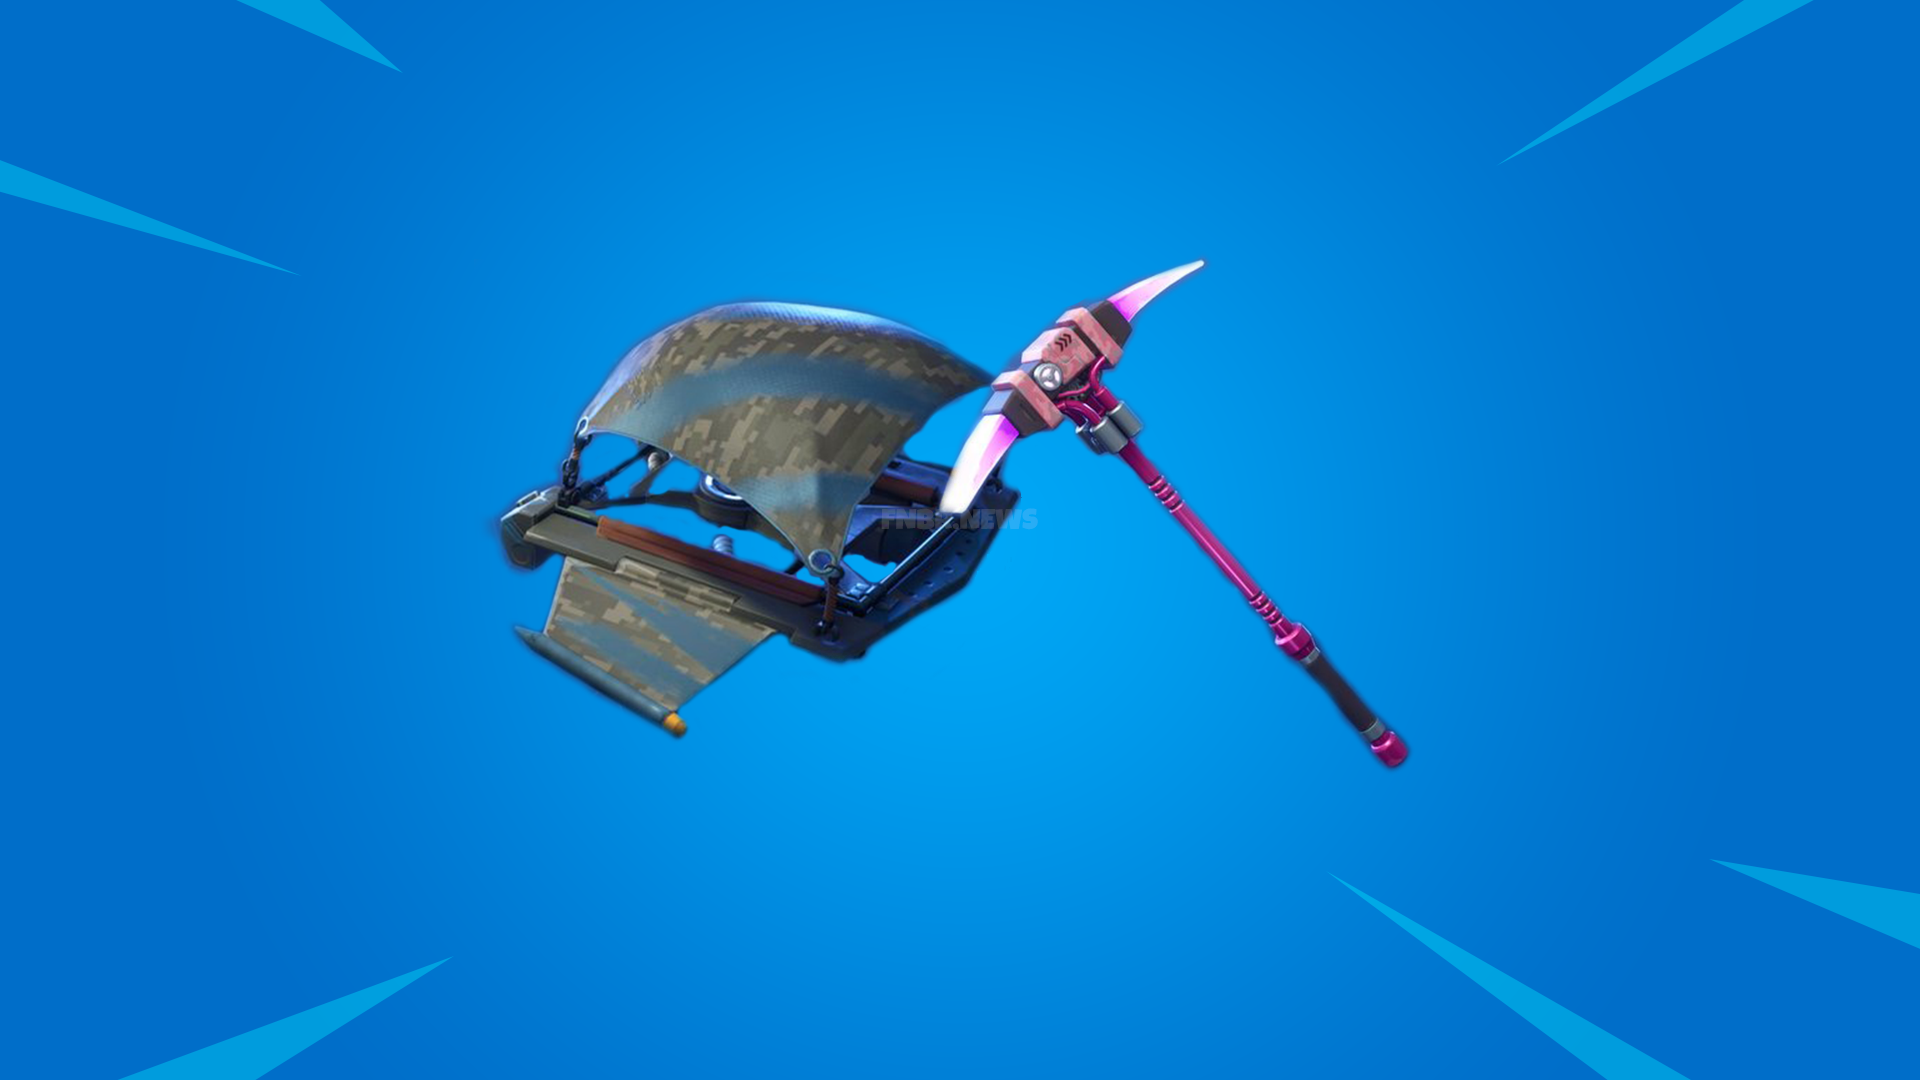 leak more battle royale rewards for save the world founders coming to fortnite - fortnite stw pickaxe